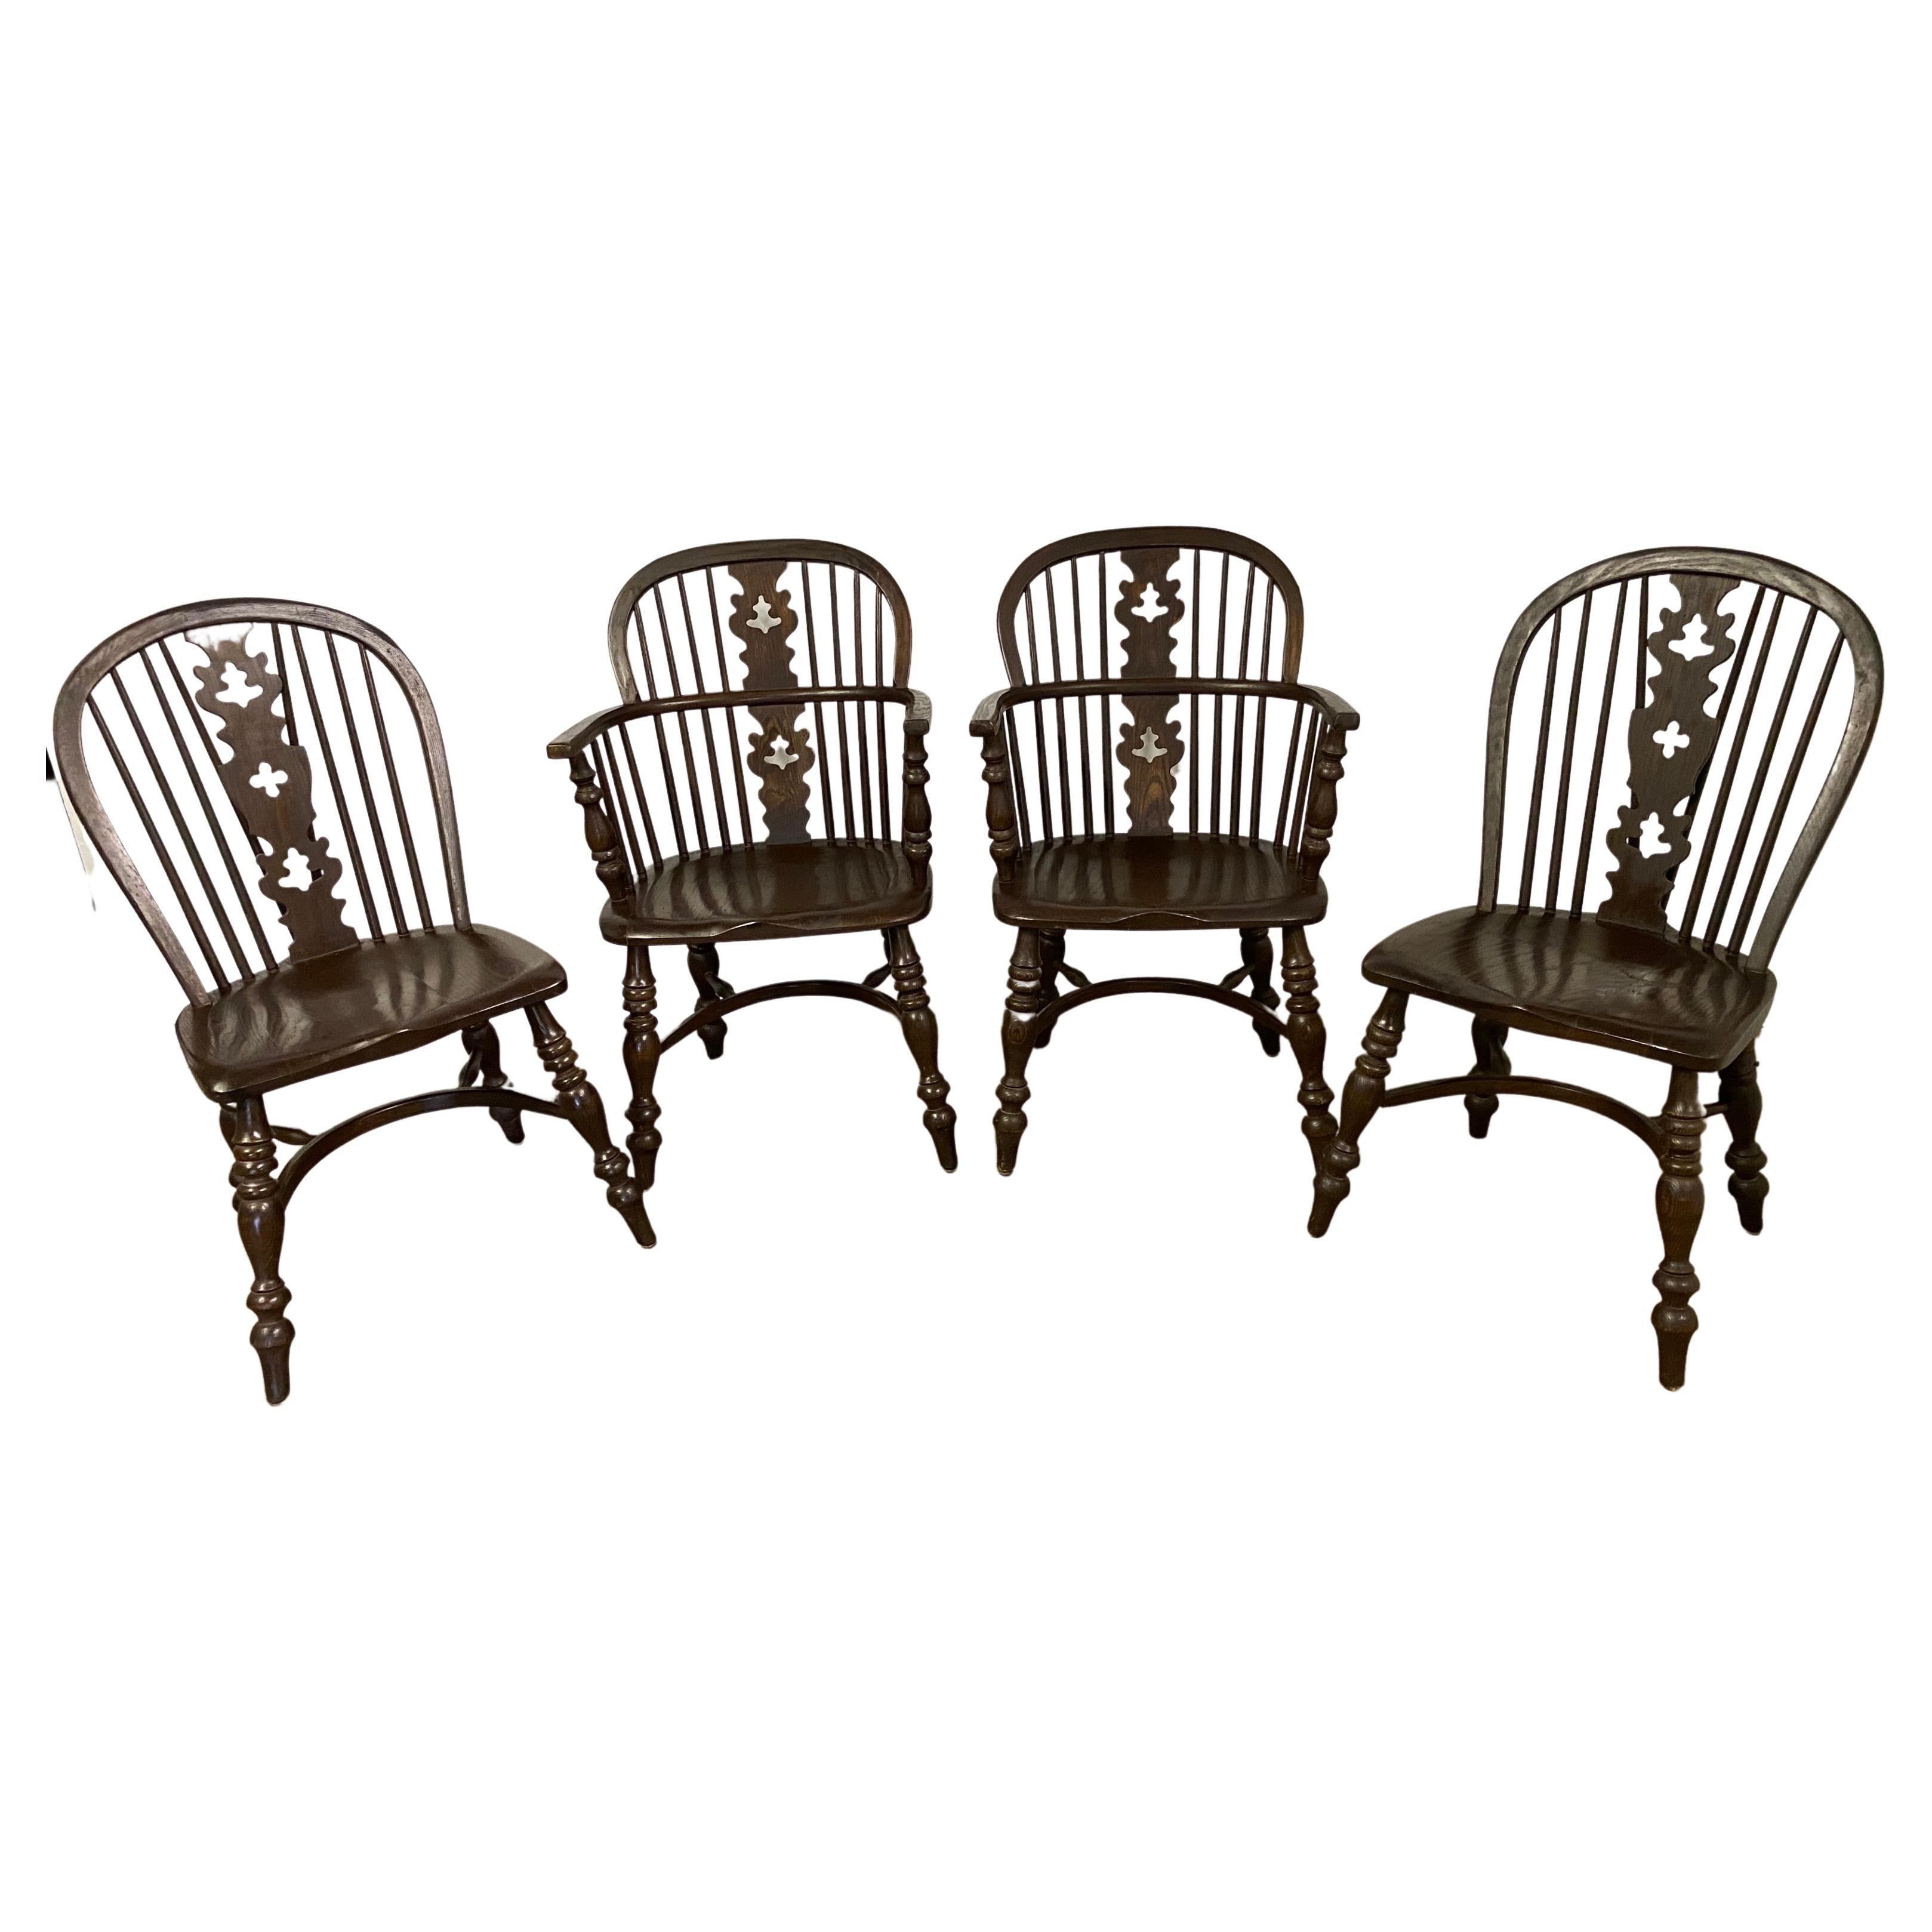 Set of Four (4) Antique English Brace Back Windsor Chairs